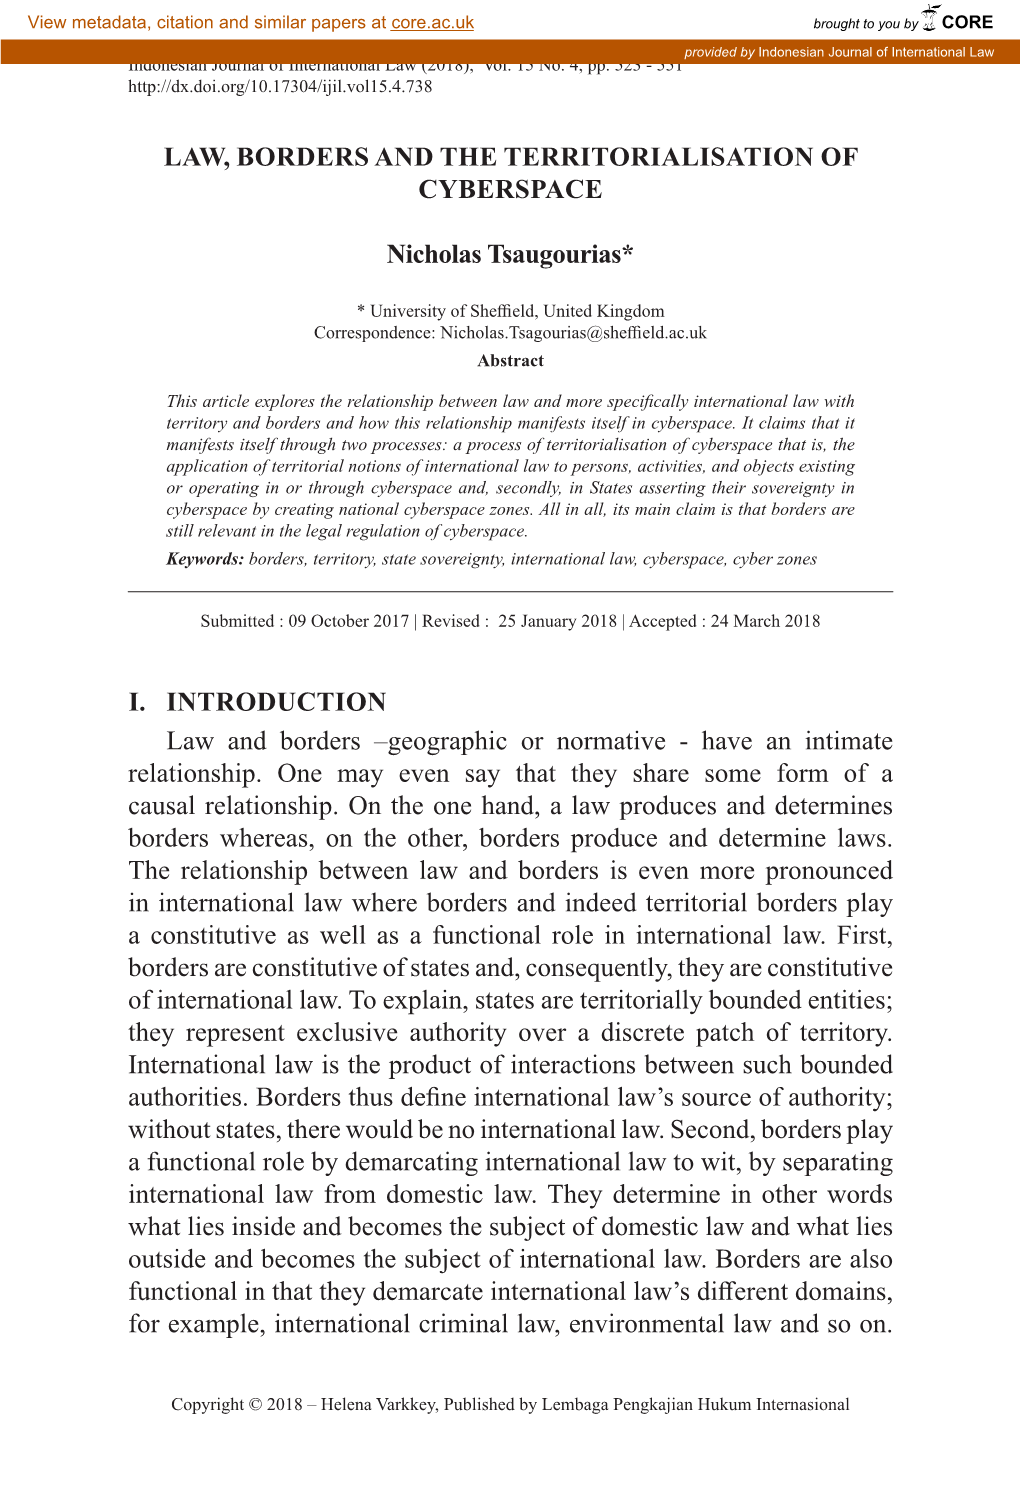 Law, Borders and the Territorialisation of Cyberspace